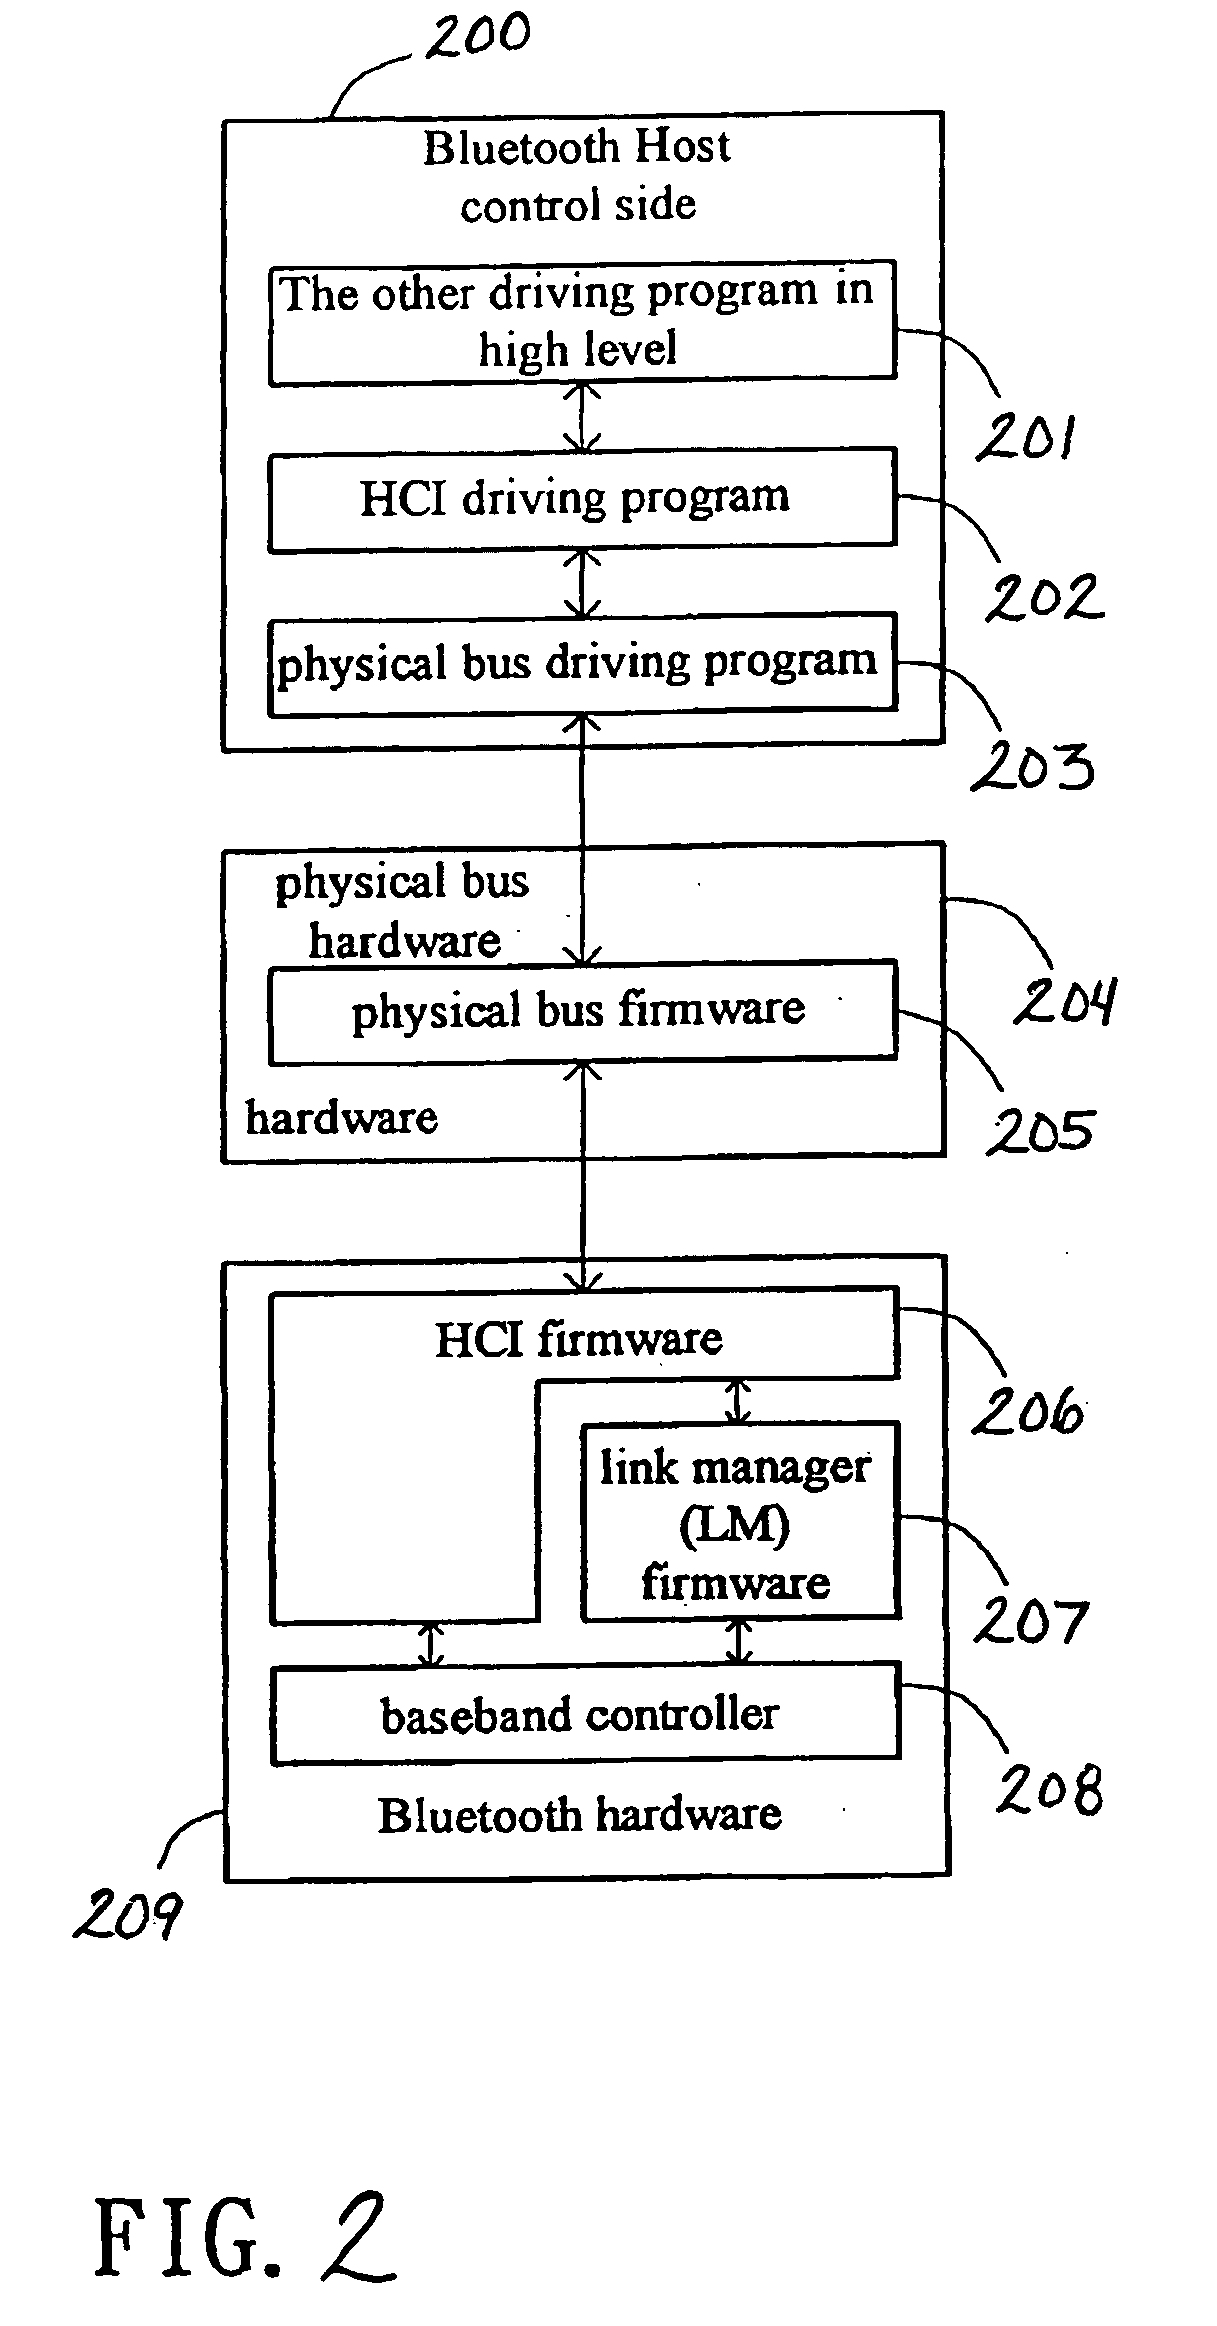 System and method for pairing dual mode wired/wireless devices